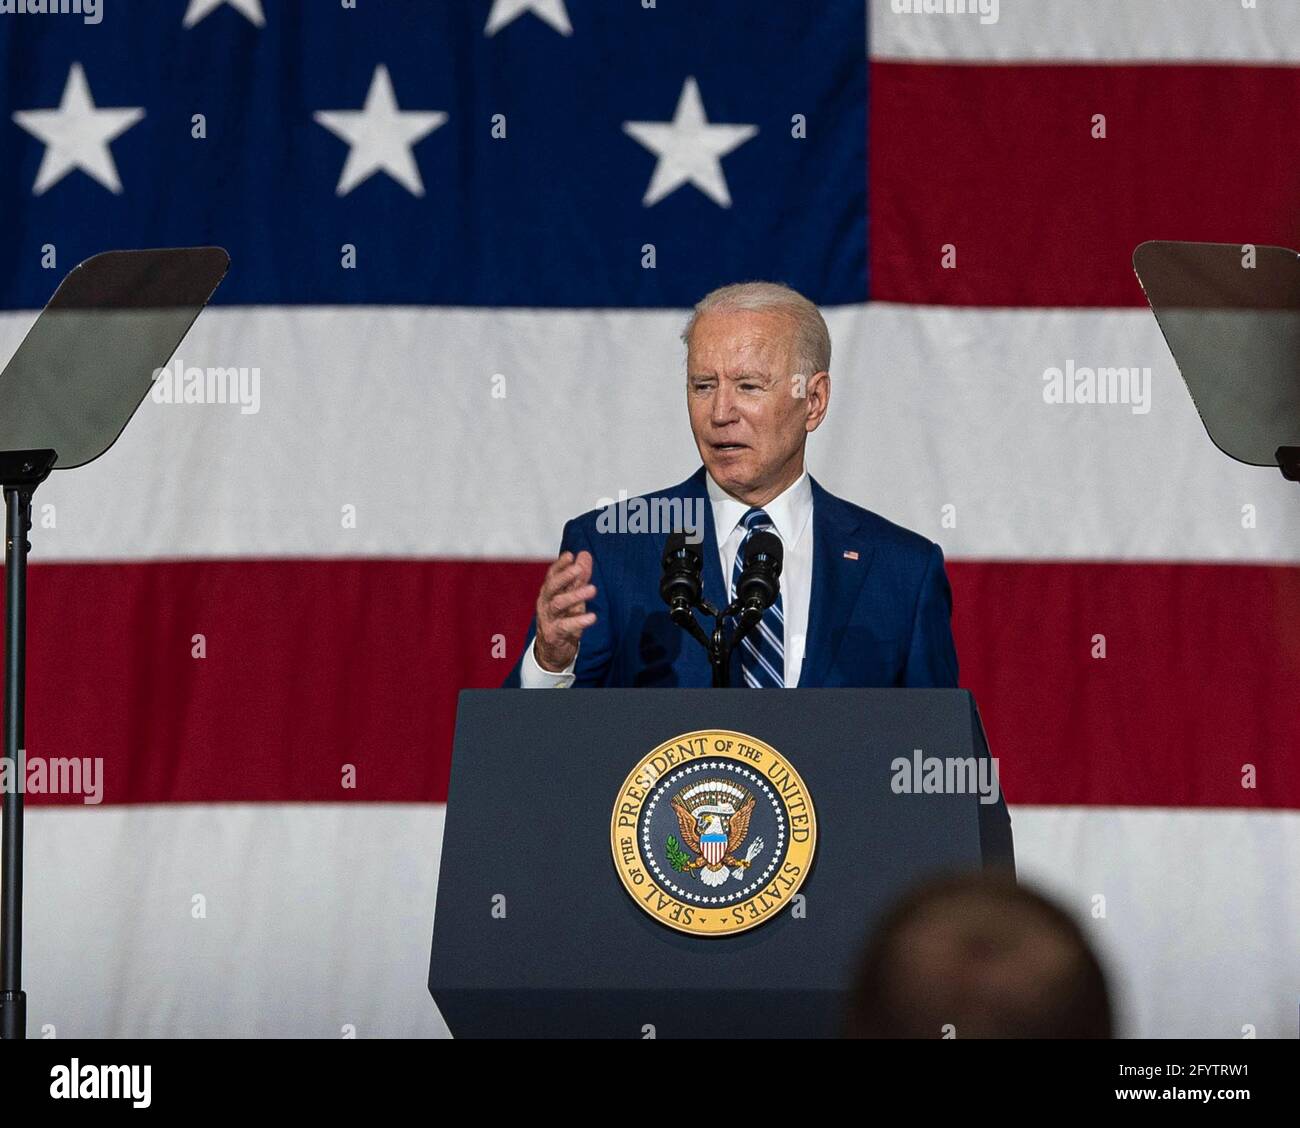 U.S President Joe Biden addresses troops during a visit to  Joint Base Langley-Eustis May 28, 2021 in Newport News, Virginia. Biden spoke on the importance of military sacrifice and thanked the members for their continued dedication to defending the nation. Stock Photo